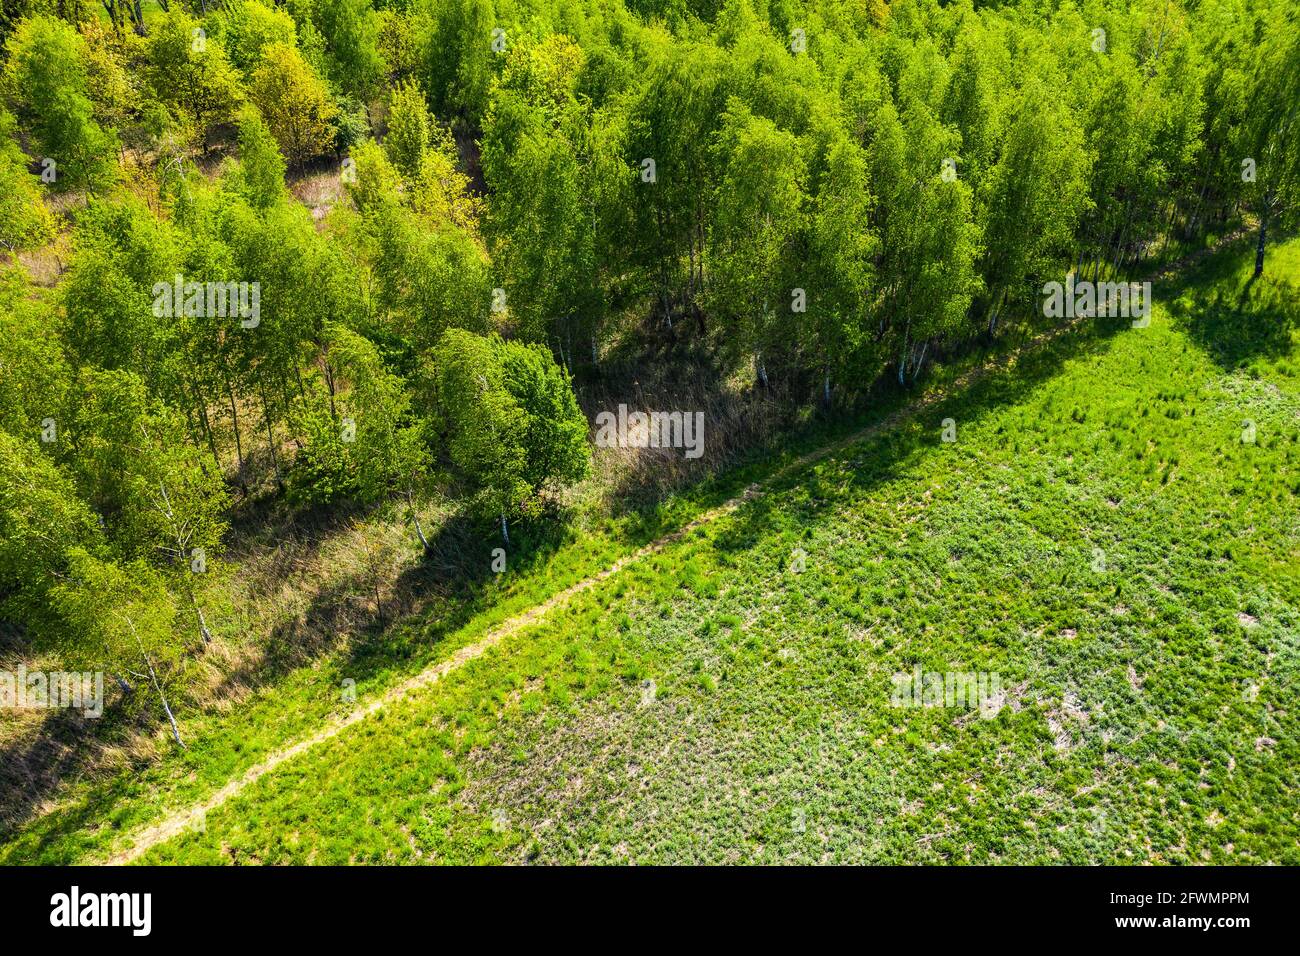 Top down view of an evergreen forest in early summer with a dirt Stock Photo